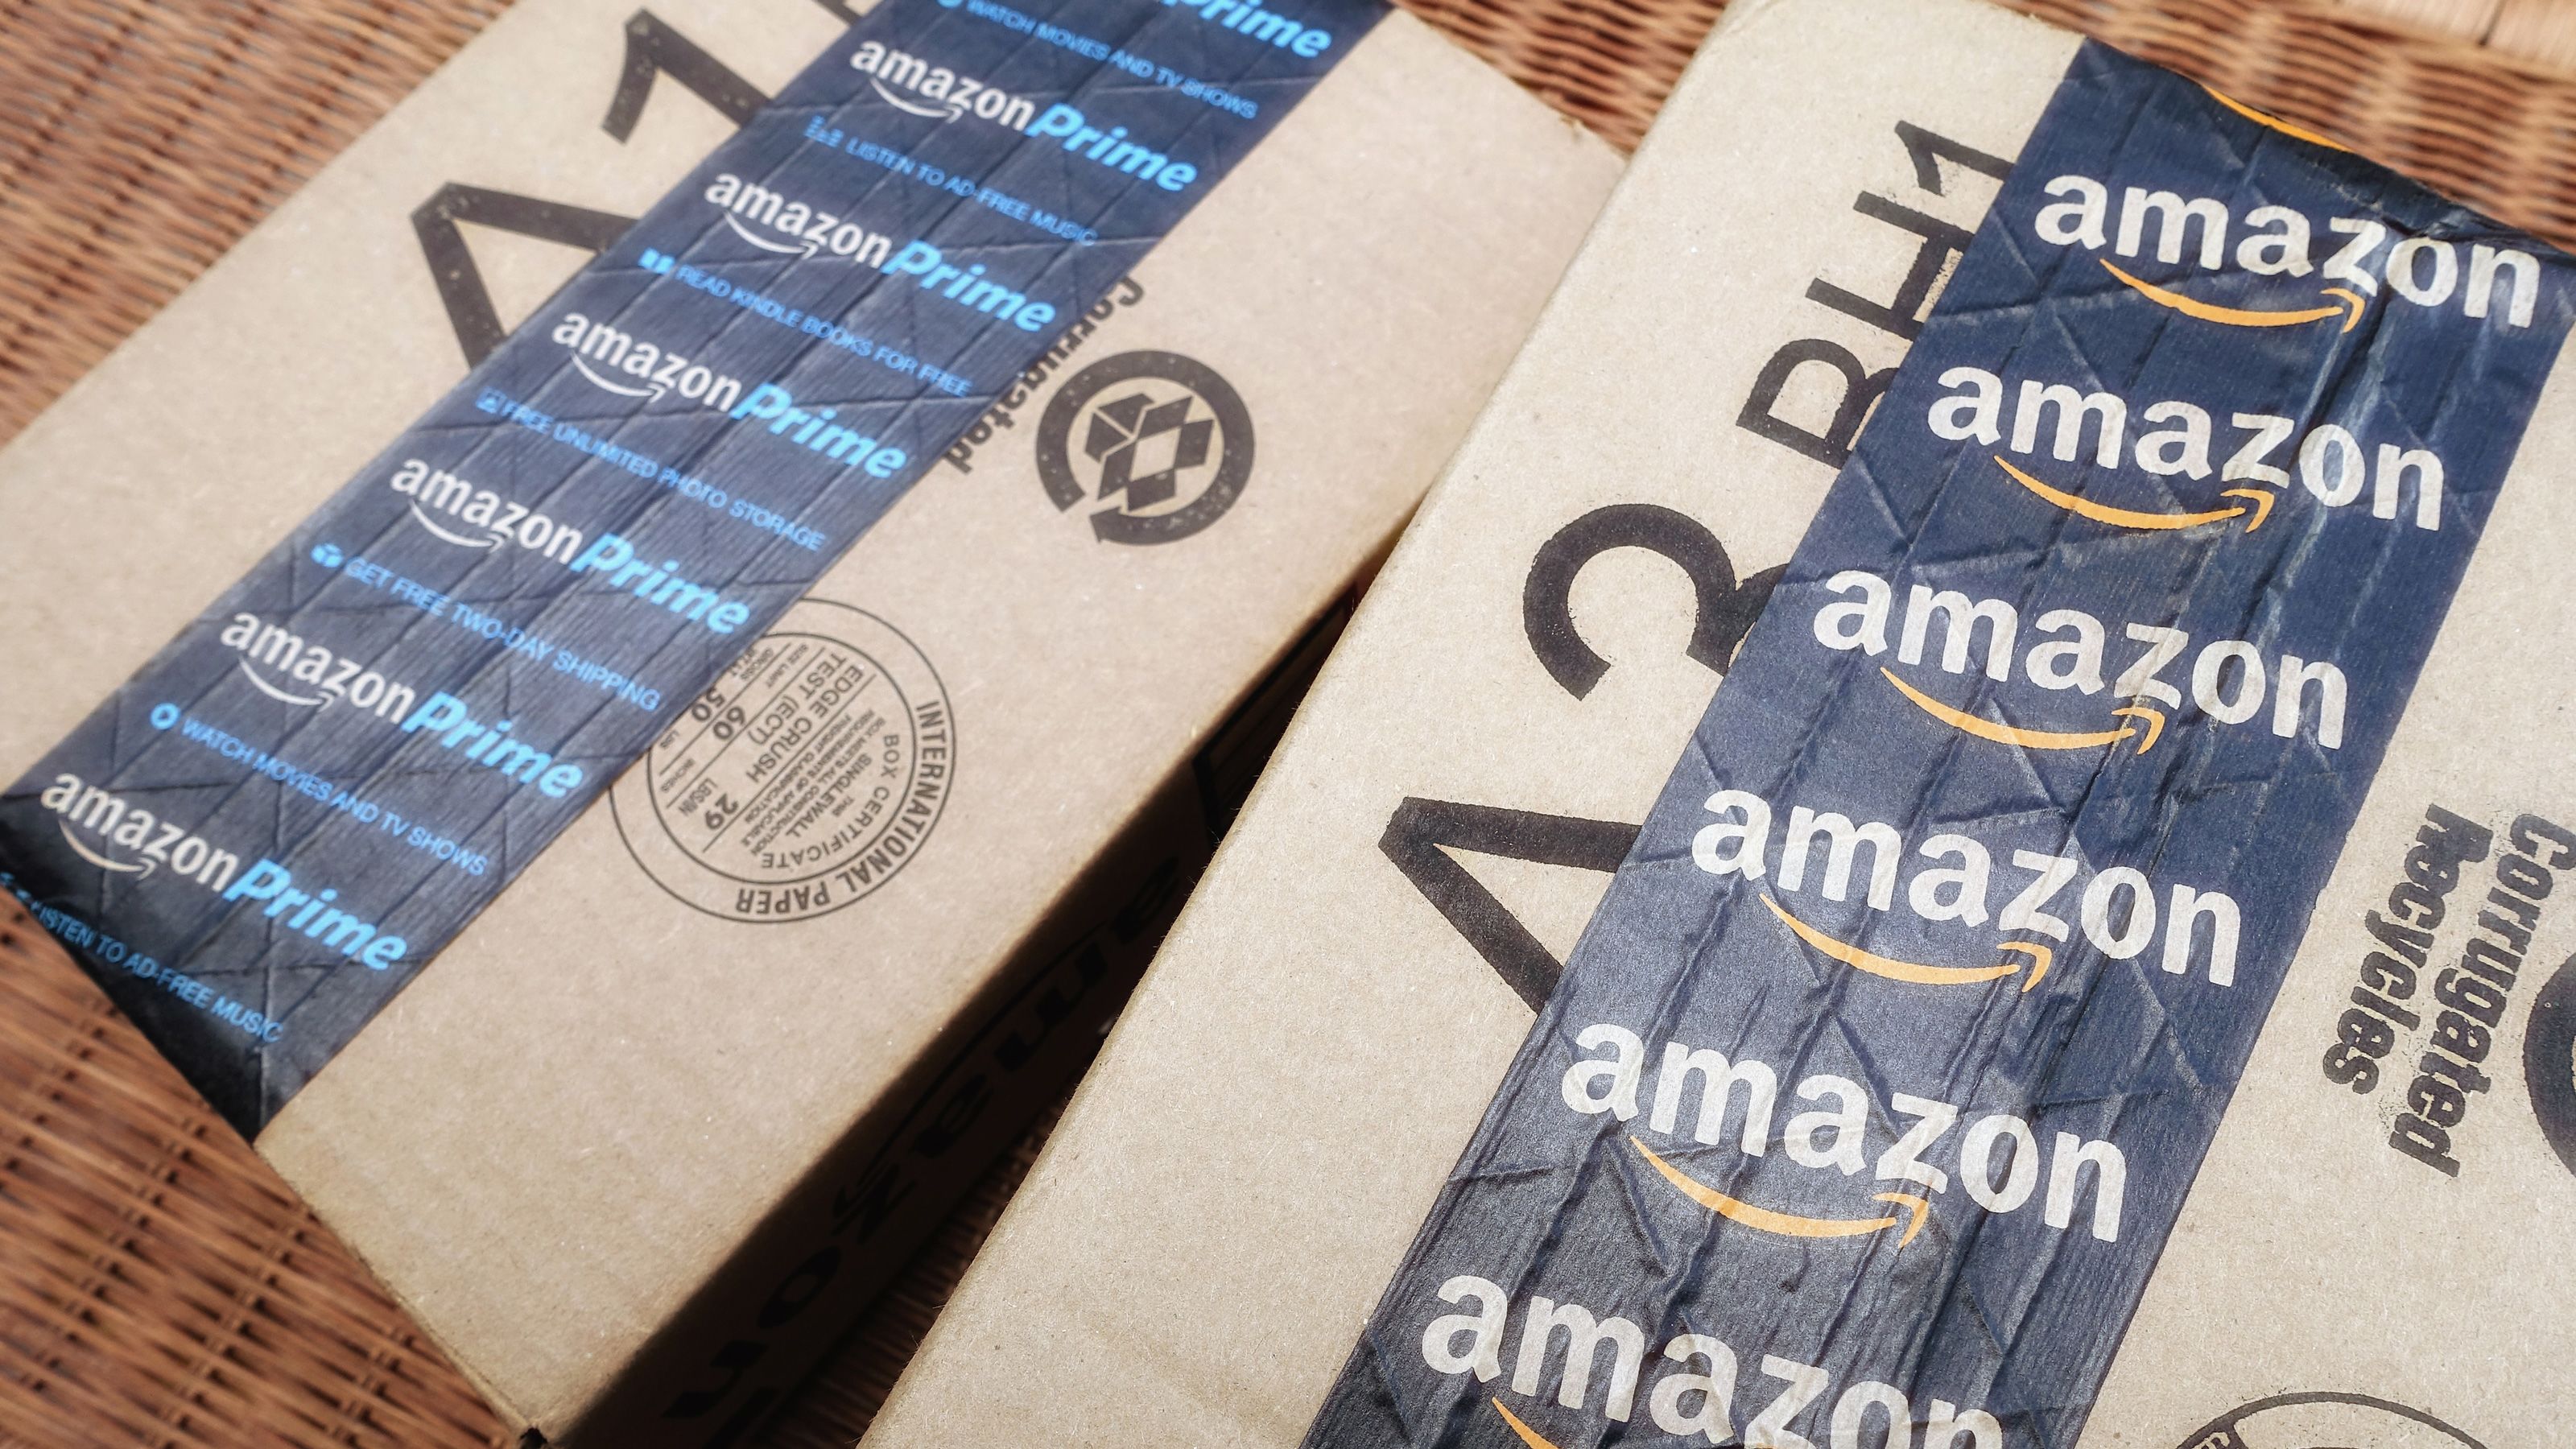 6 ways to maximize Black Friday savings at Amazon with your credit card